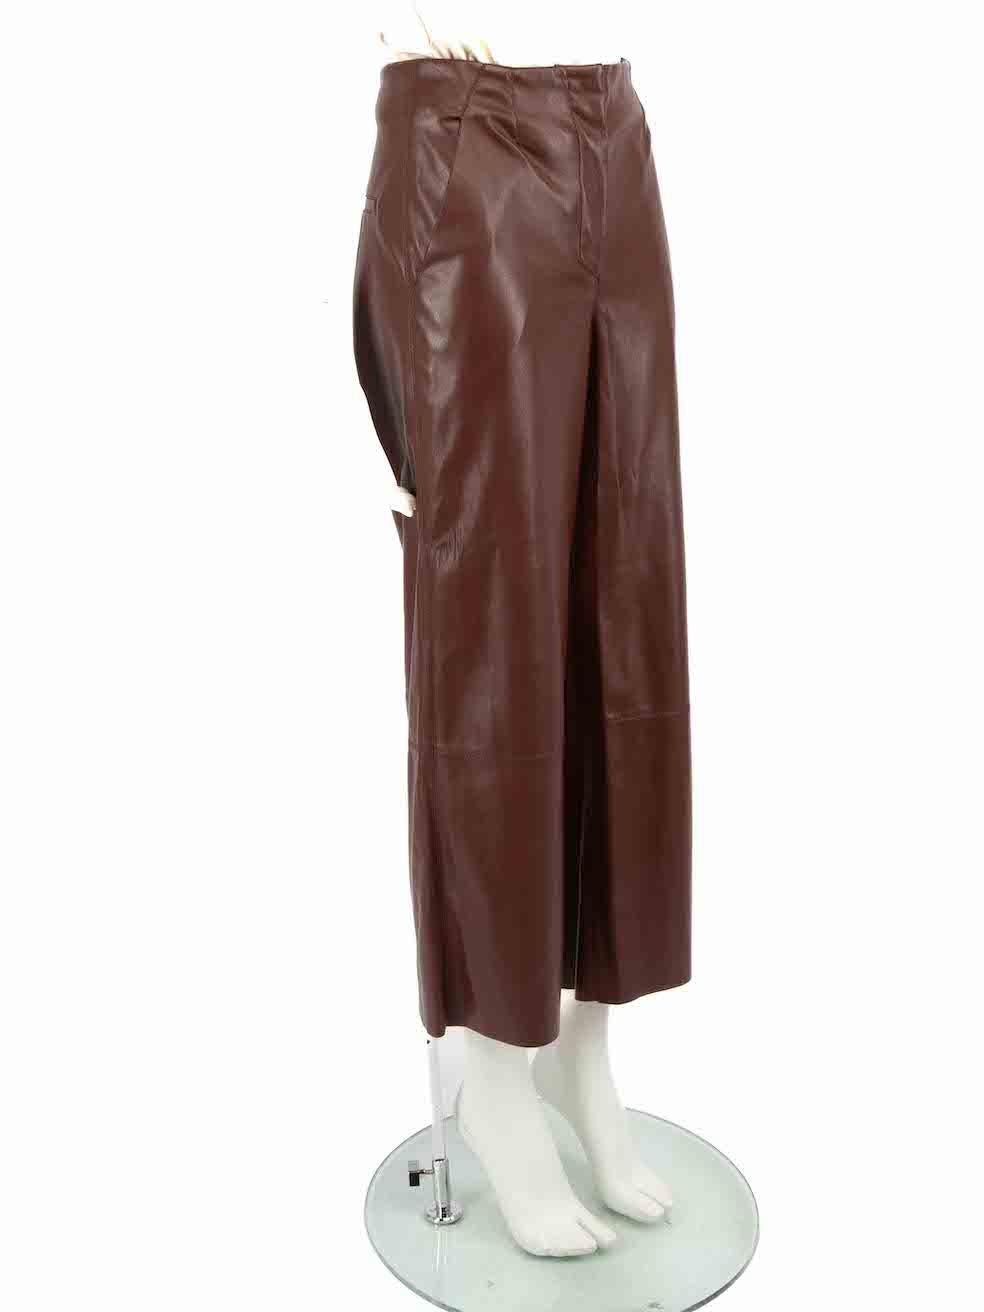 CONDITION is Very good. Hardly any visible wear to trousers is evident on this used Nanushka designer resale item.
 
 Details
 Brown
 Vegan leather
 Trousers
 Straight leg
 High rise
 2x Side pockets
 Zip, hook and button fastening
 
 
 Made in